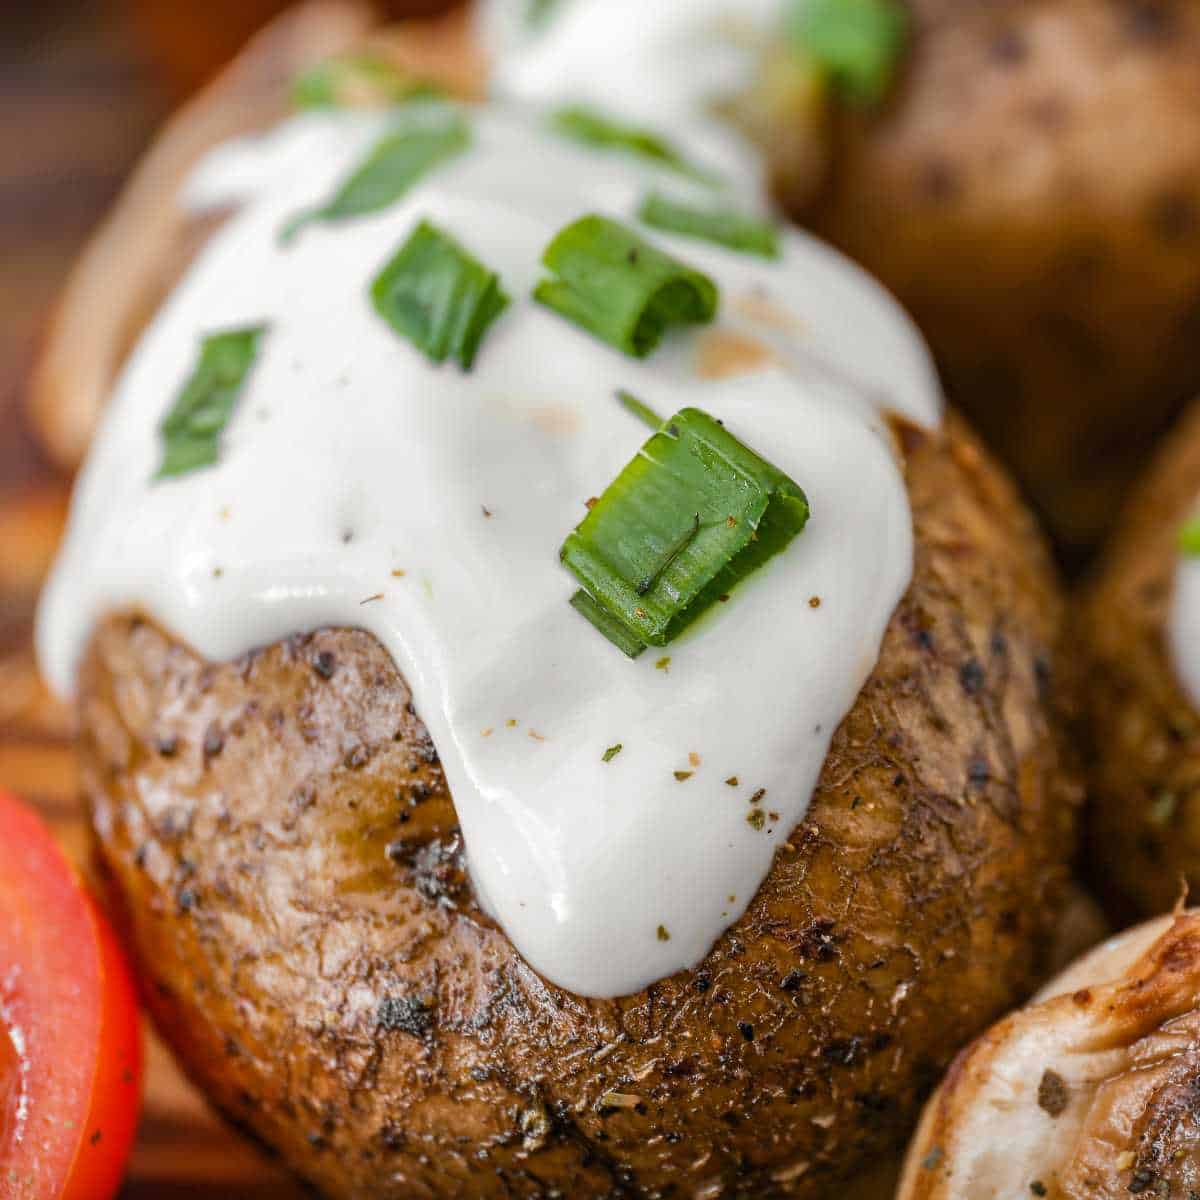 A baked potato with dairy free sour cream